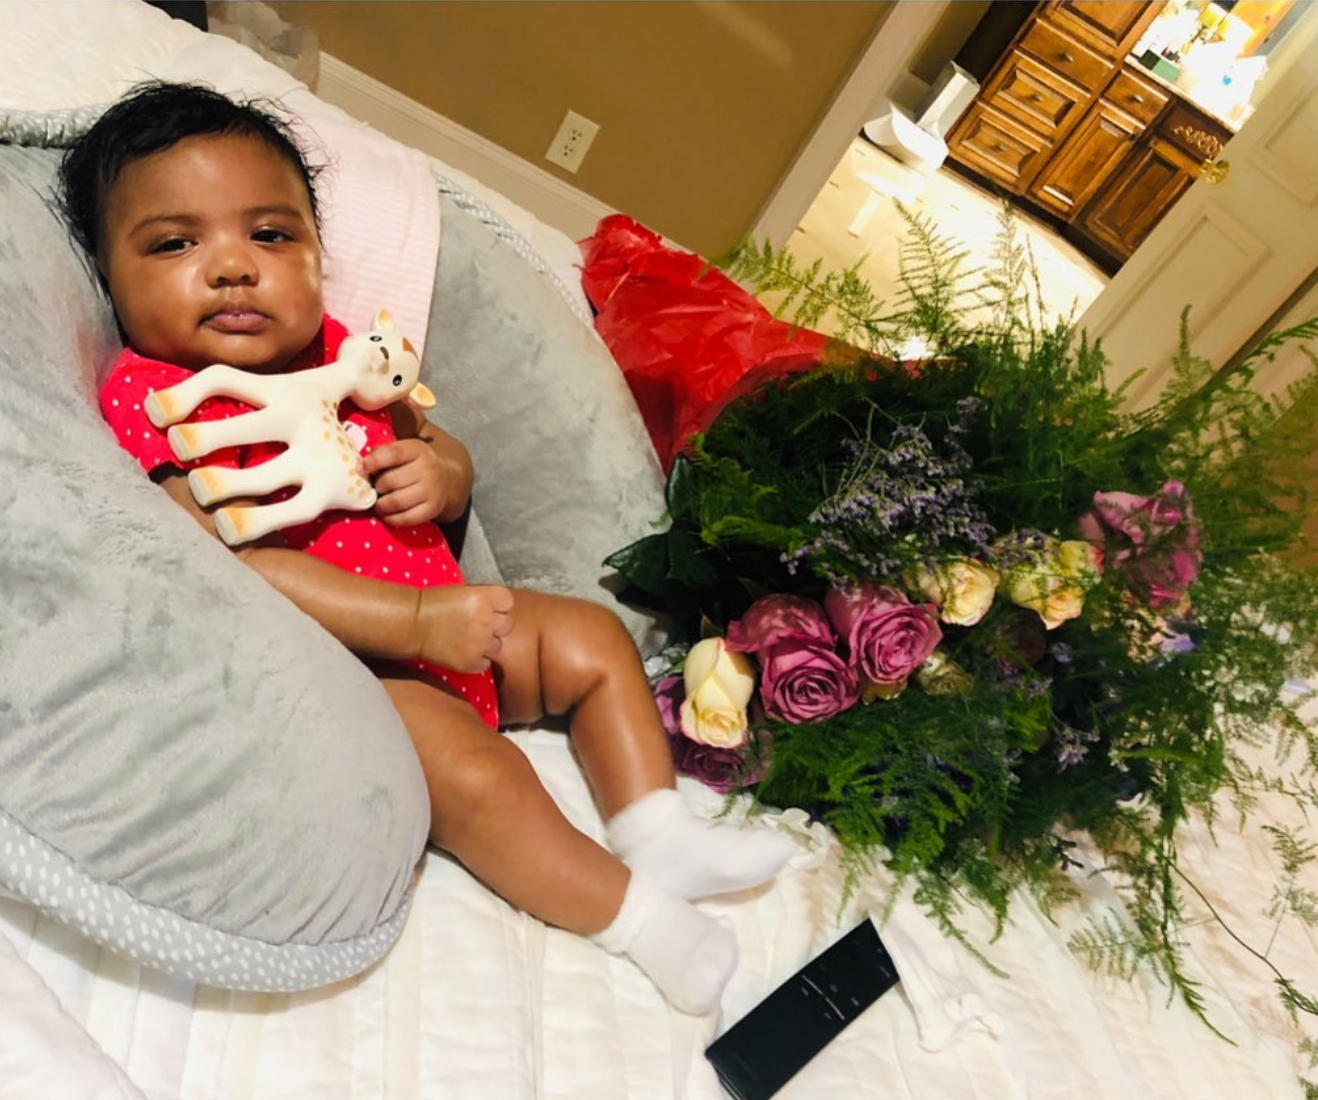 Porsha Williams And Dennis McKinley's Baby Girl, Pilar, Is Growing Up So Fast